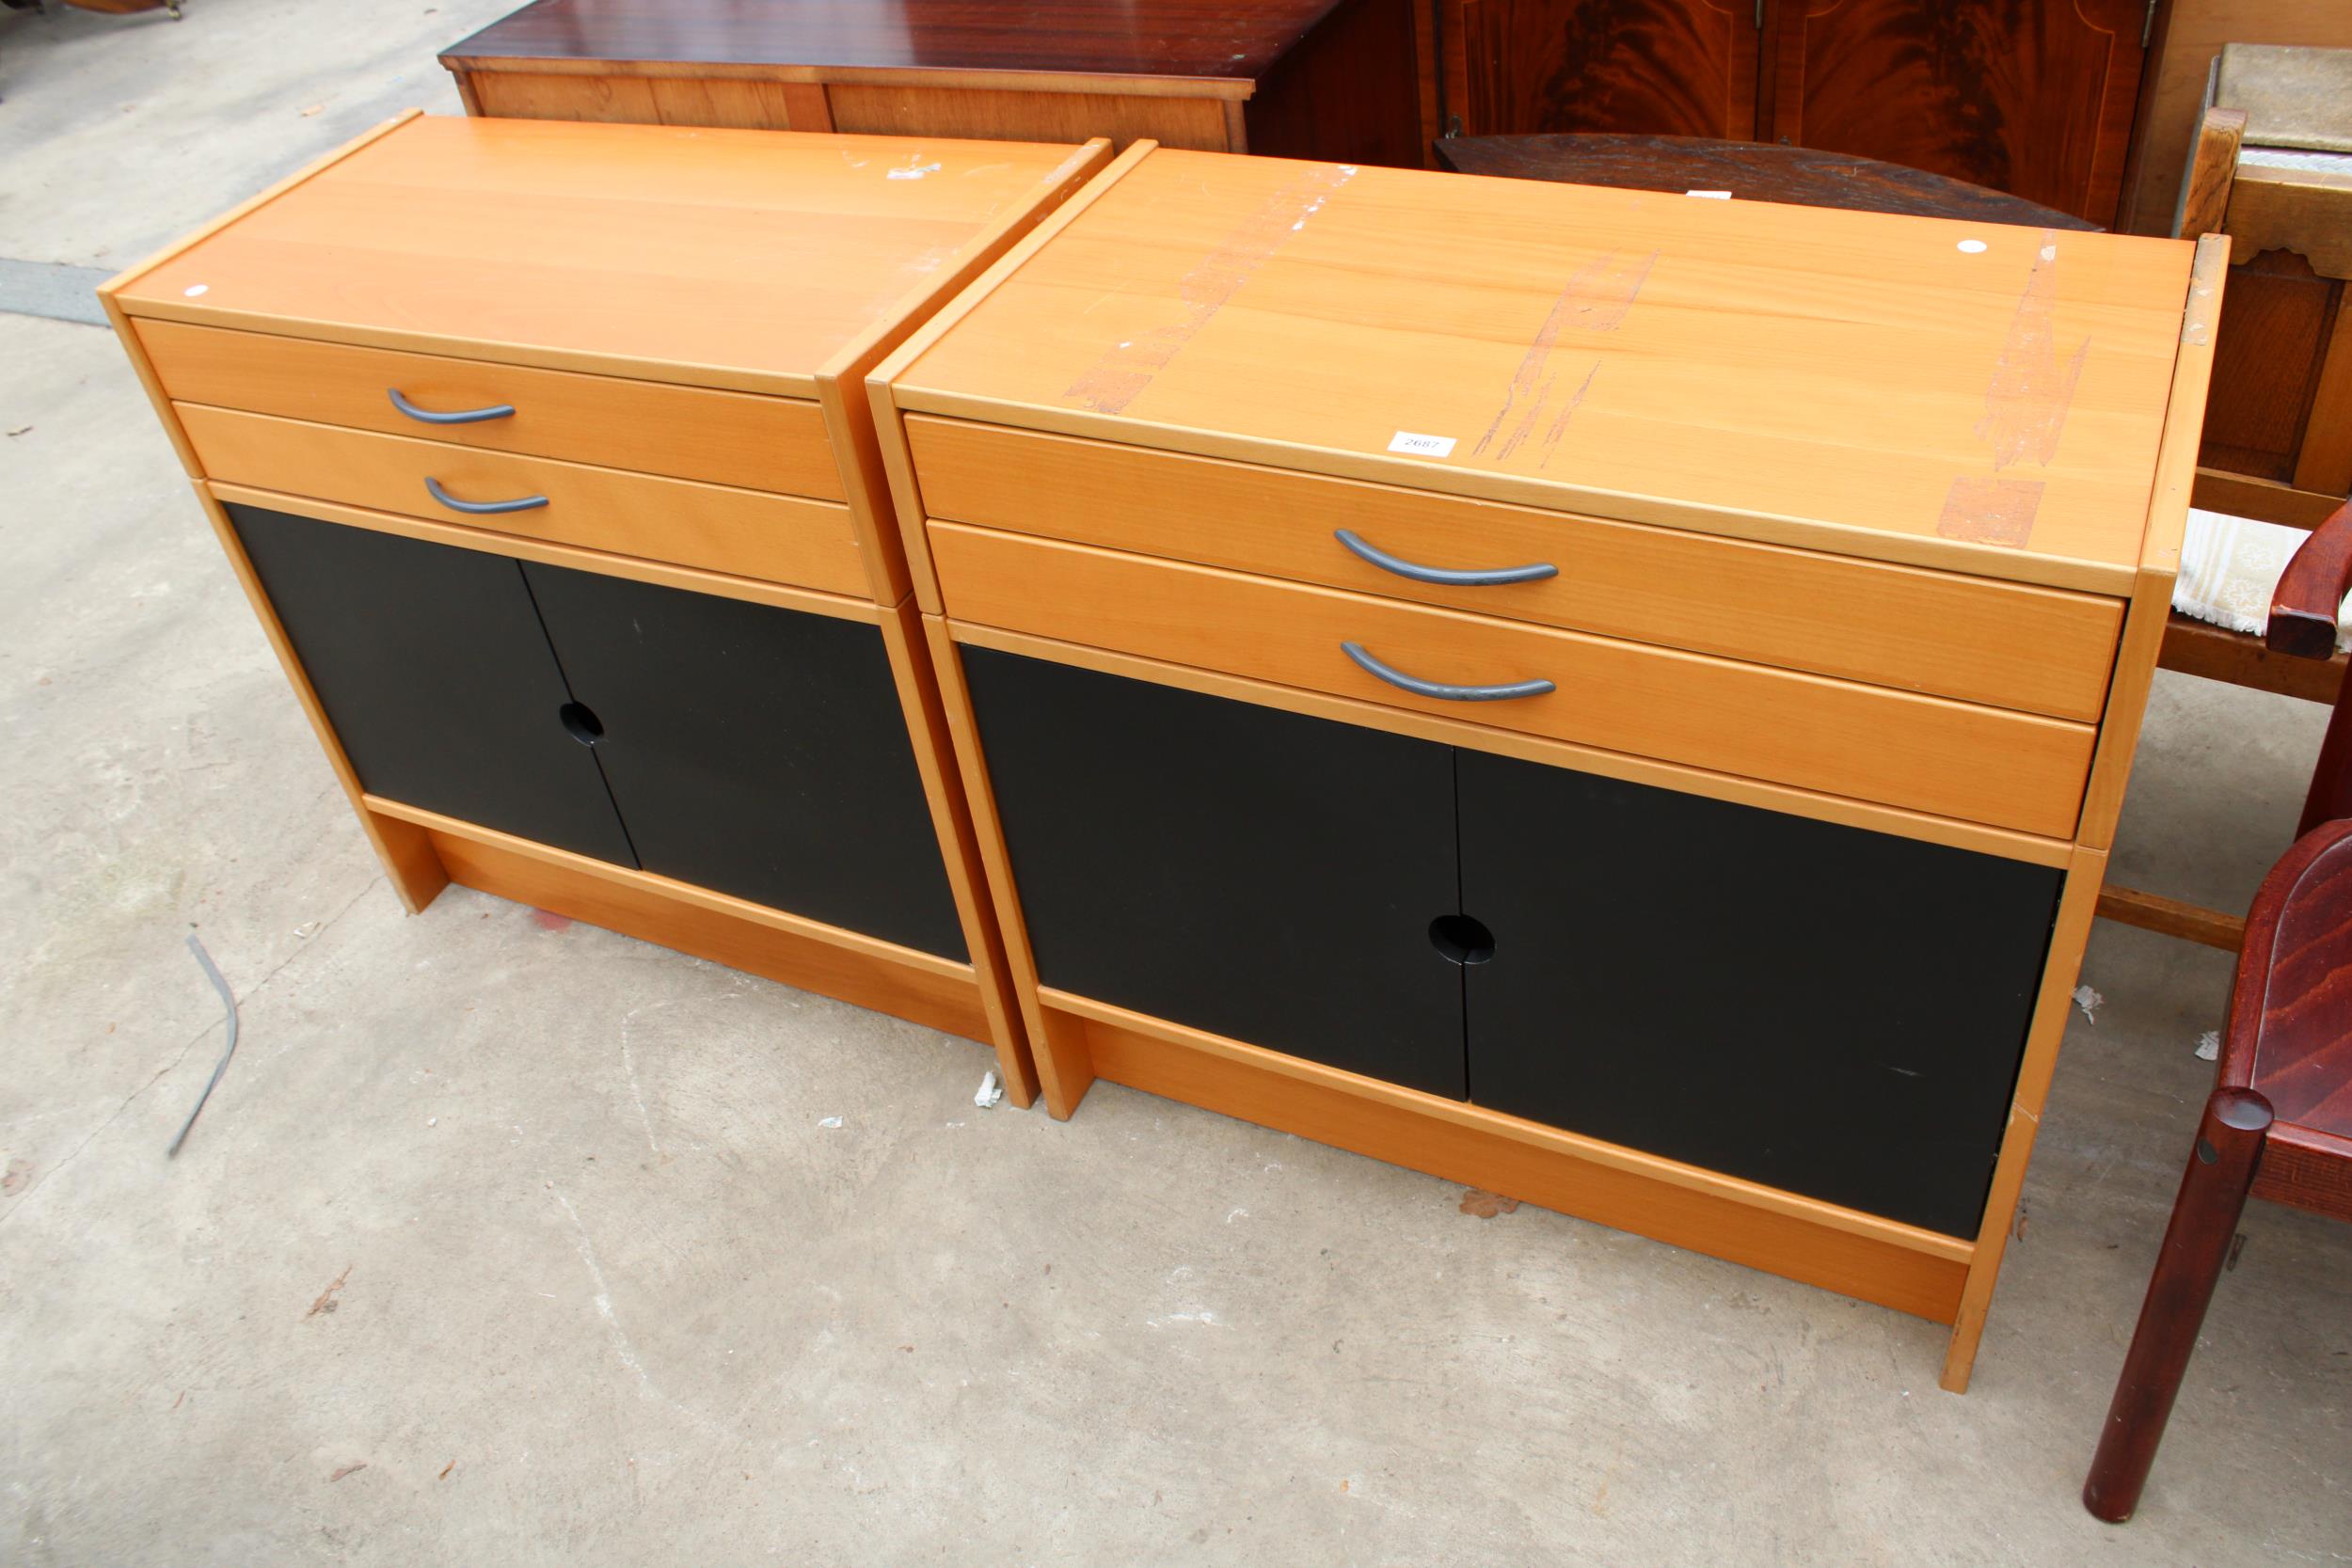 A PAIR OF TEAK SIDE CABINETS WITH PAINTED DOORS